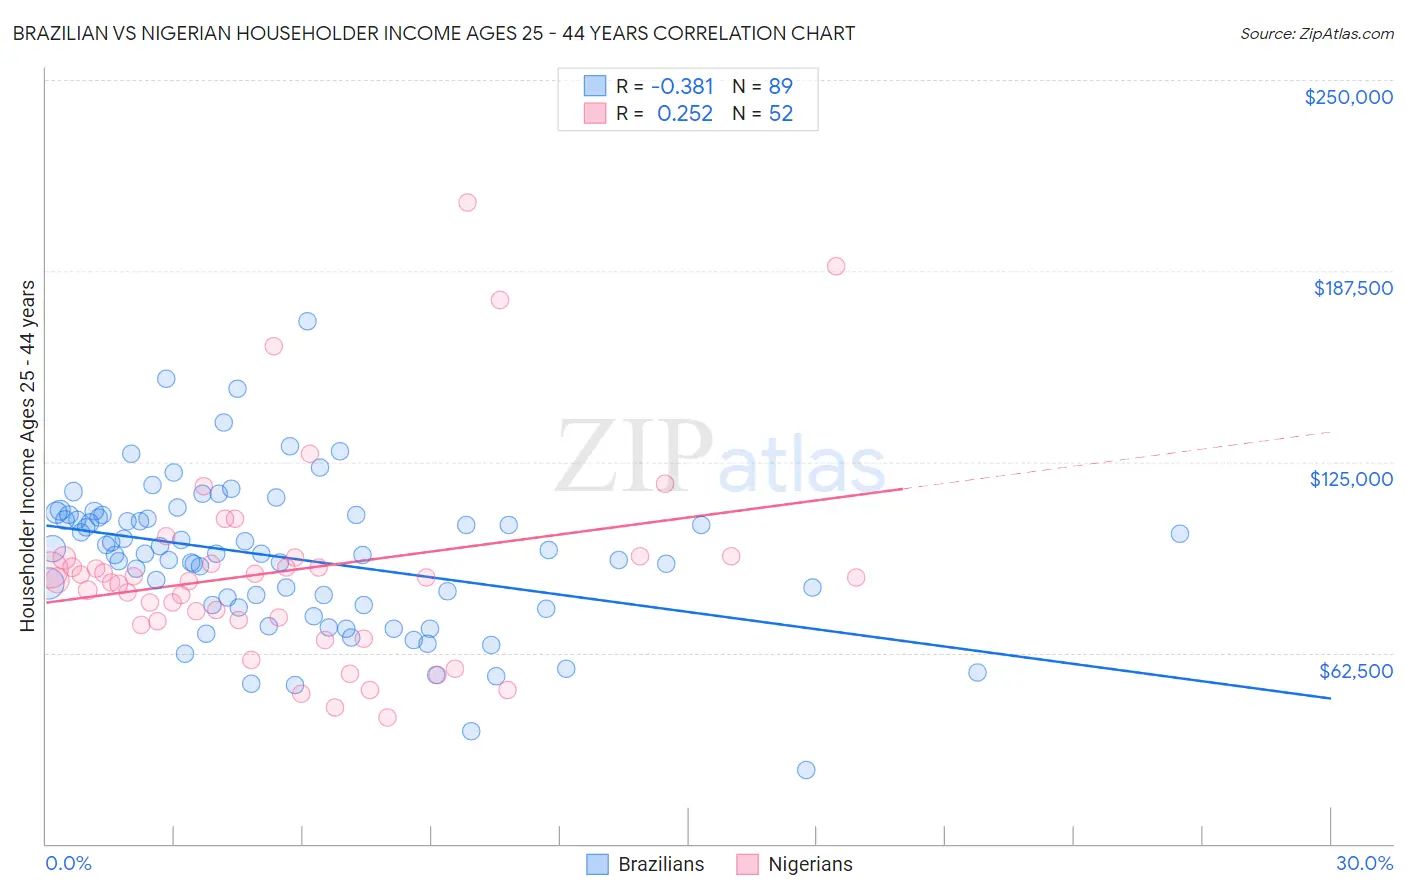 Brazilian vs Nigerian Householder Income Ages 25 - 44 years